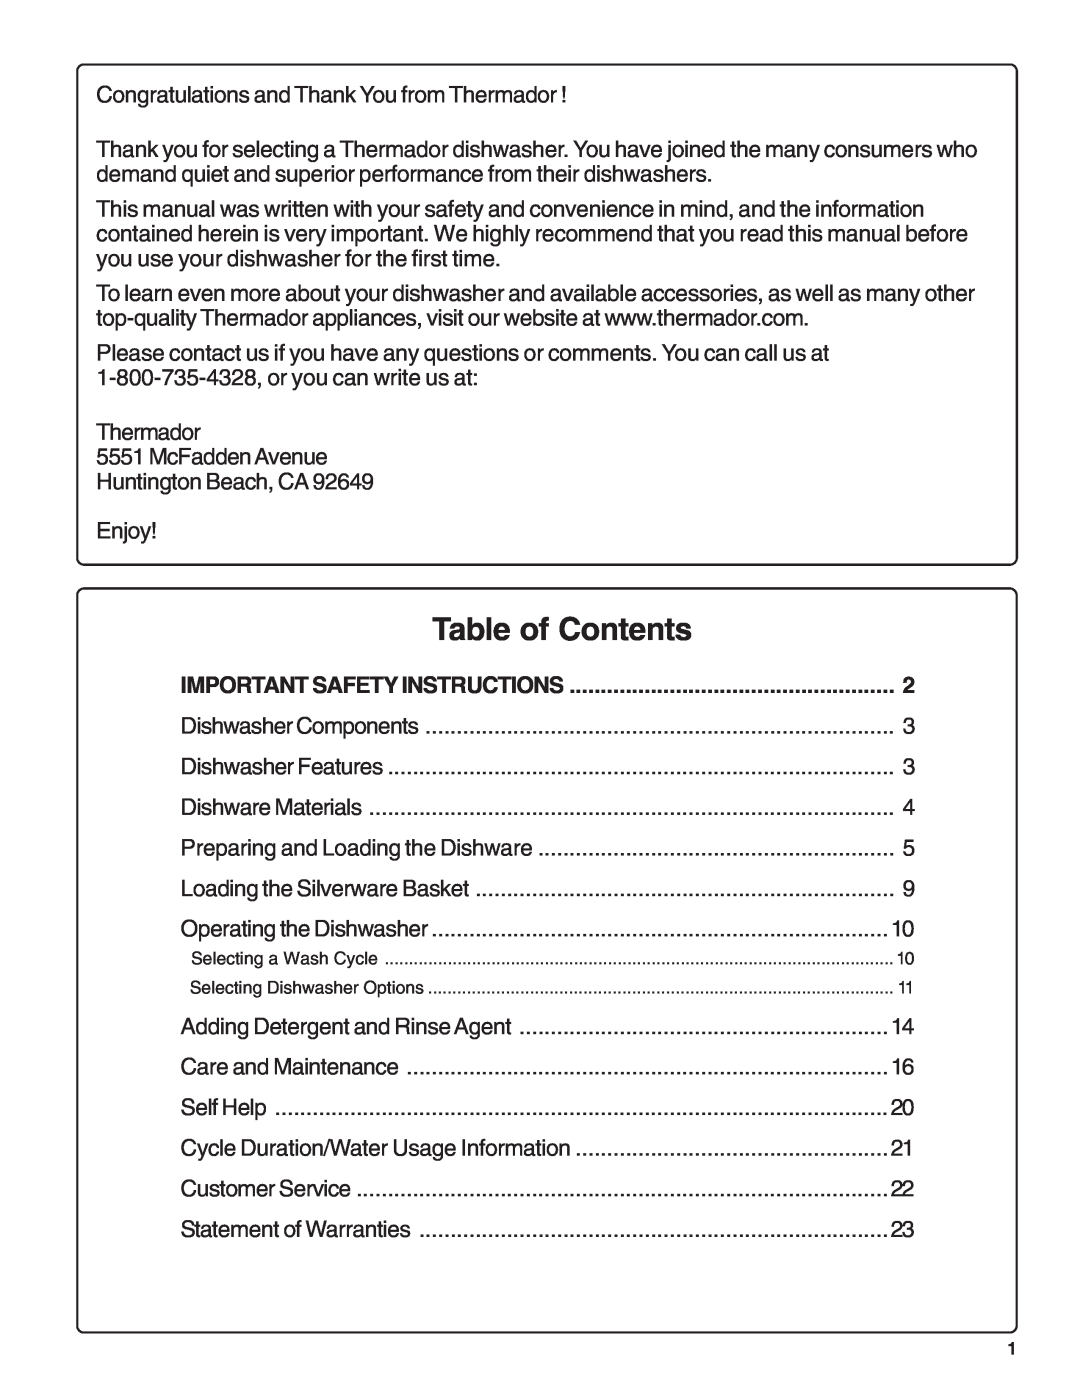 Thermador DWHD94BF manual Table of Contents 